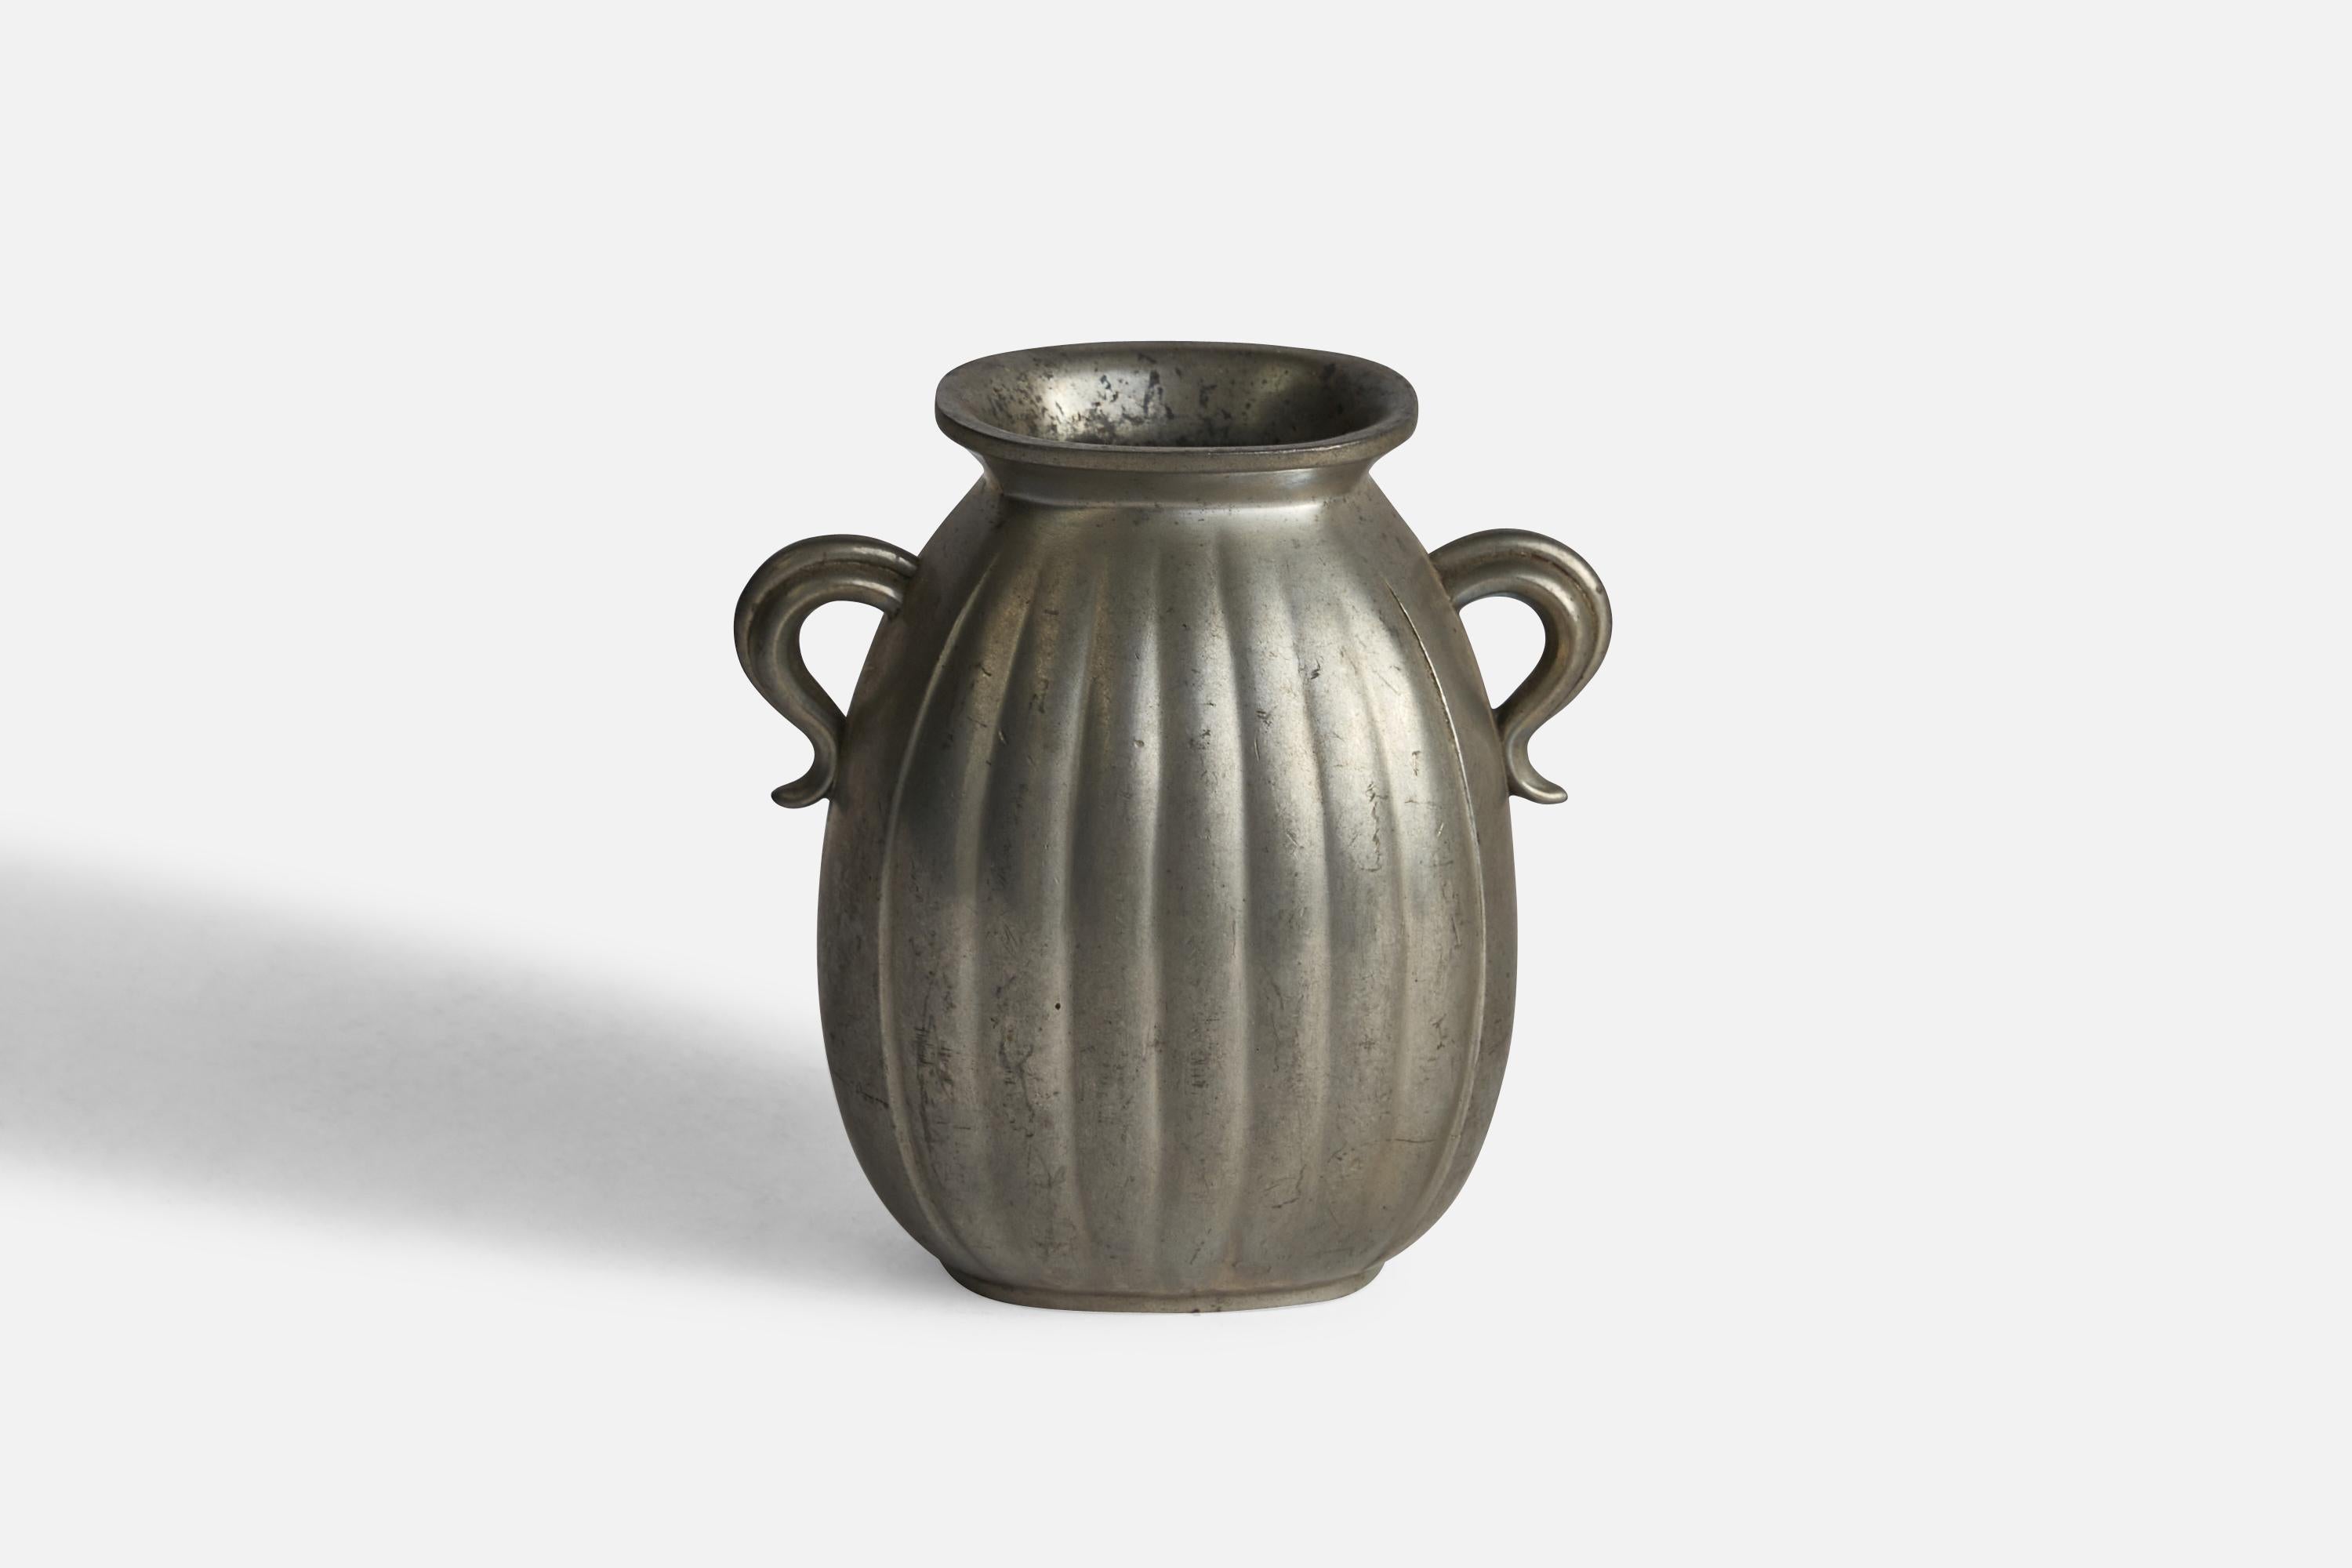 A fluted pewter vase designed and produced by Just Andersen, Denmark, 1930s.